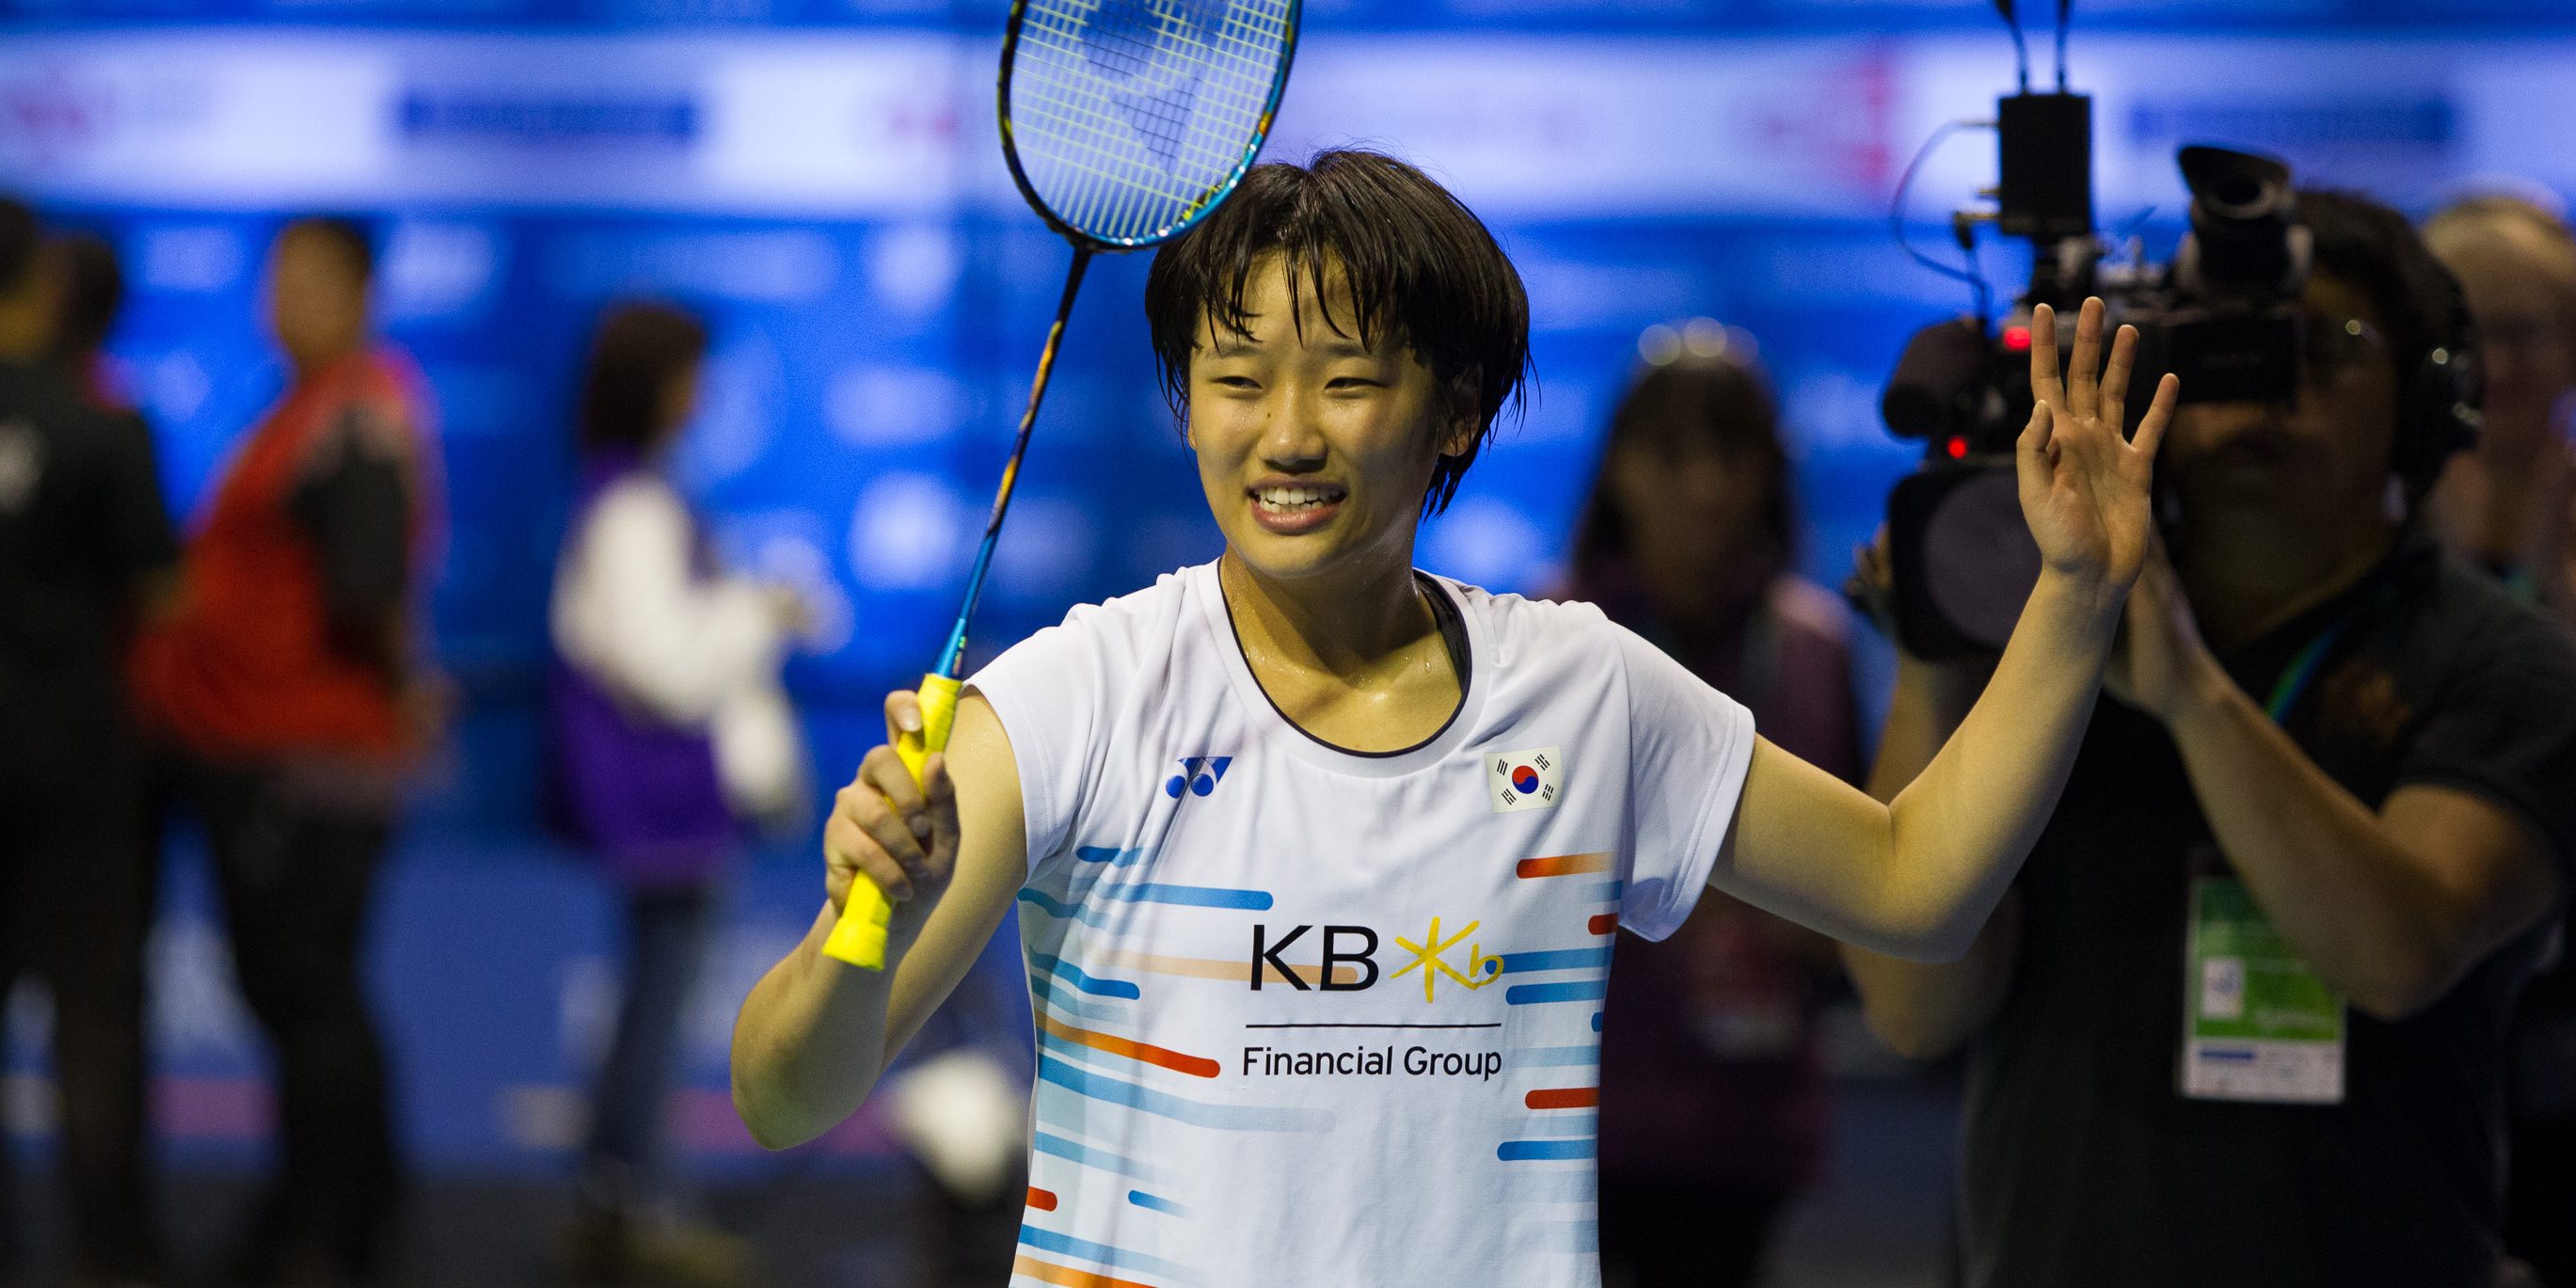 17-year-old An Se Young defeats 2012 Olympic Gold Medalist to take the title #NZBO19